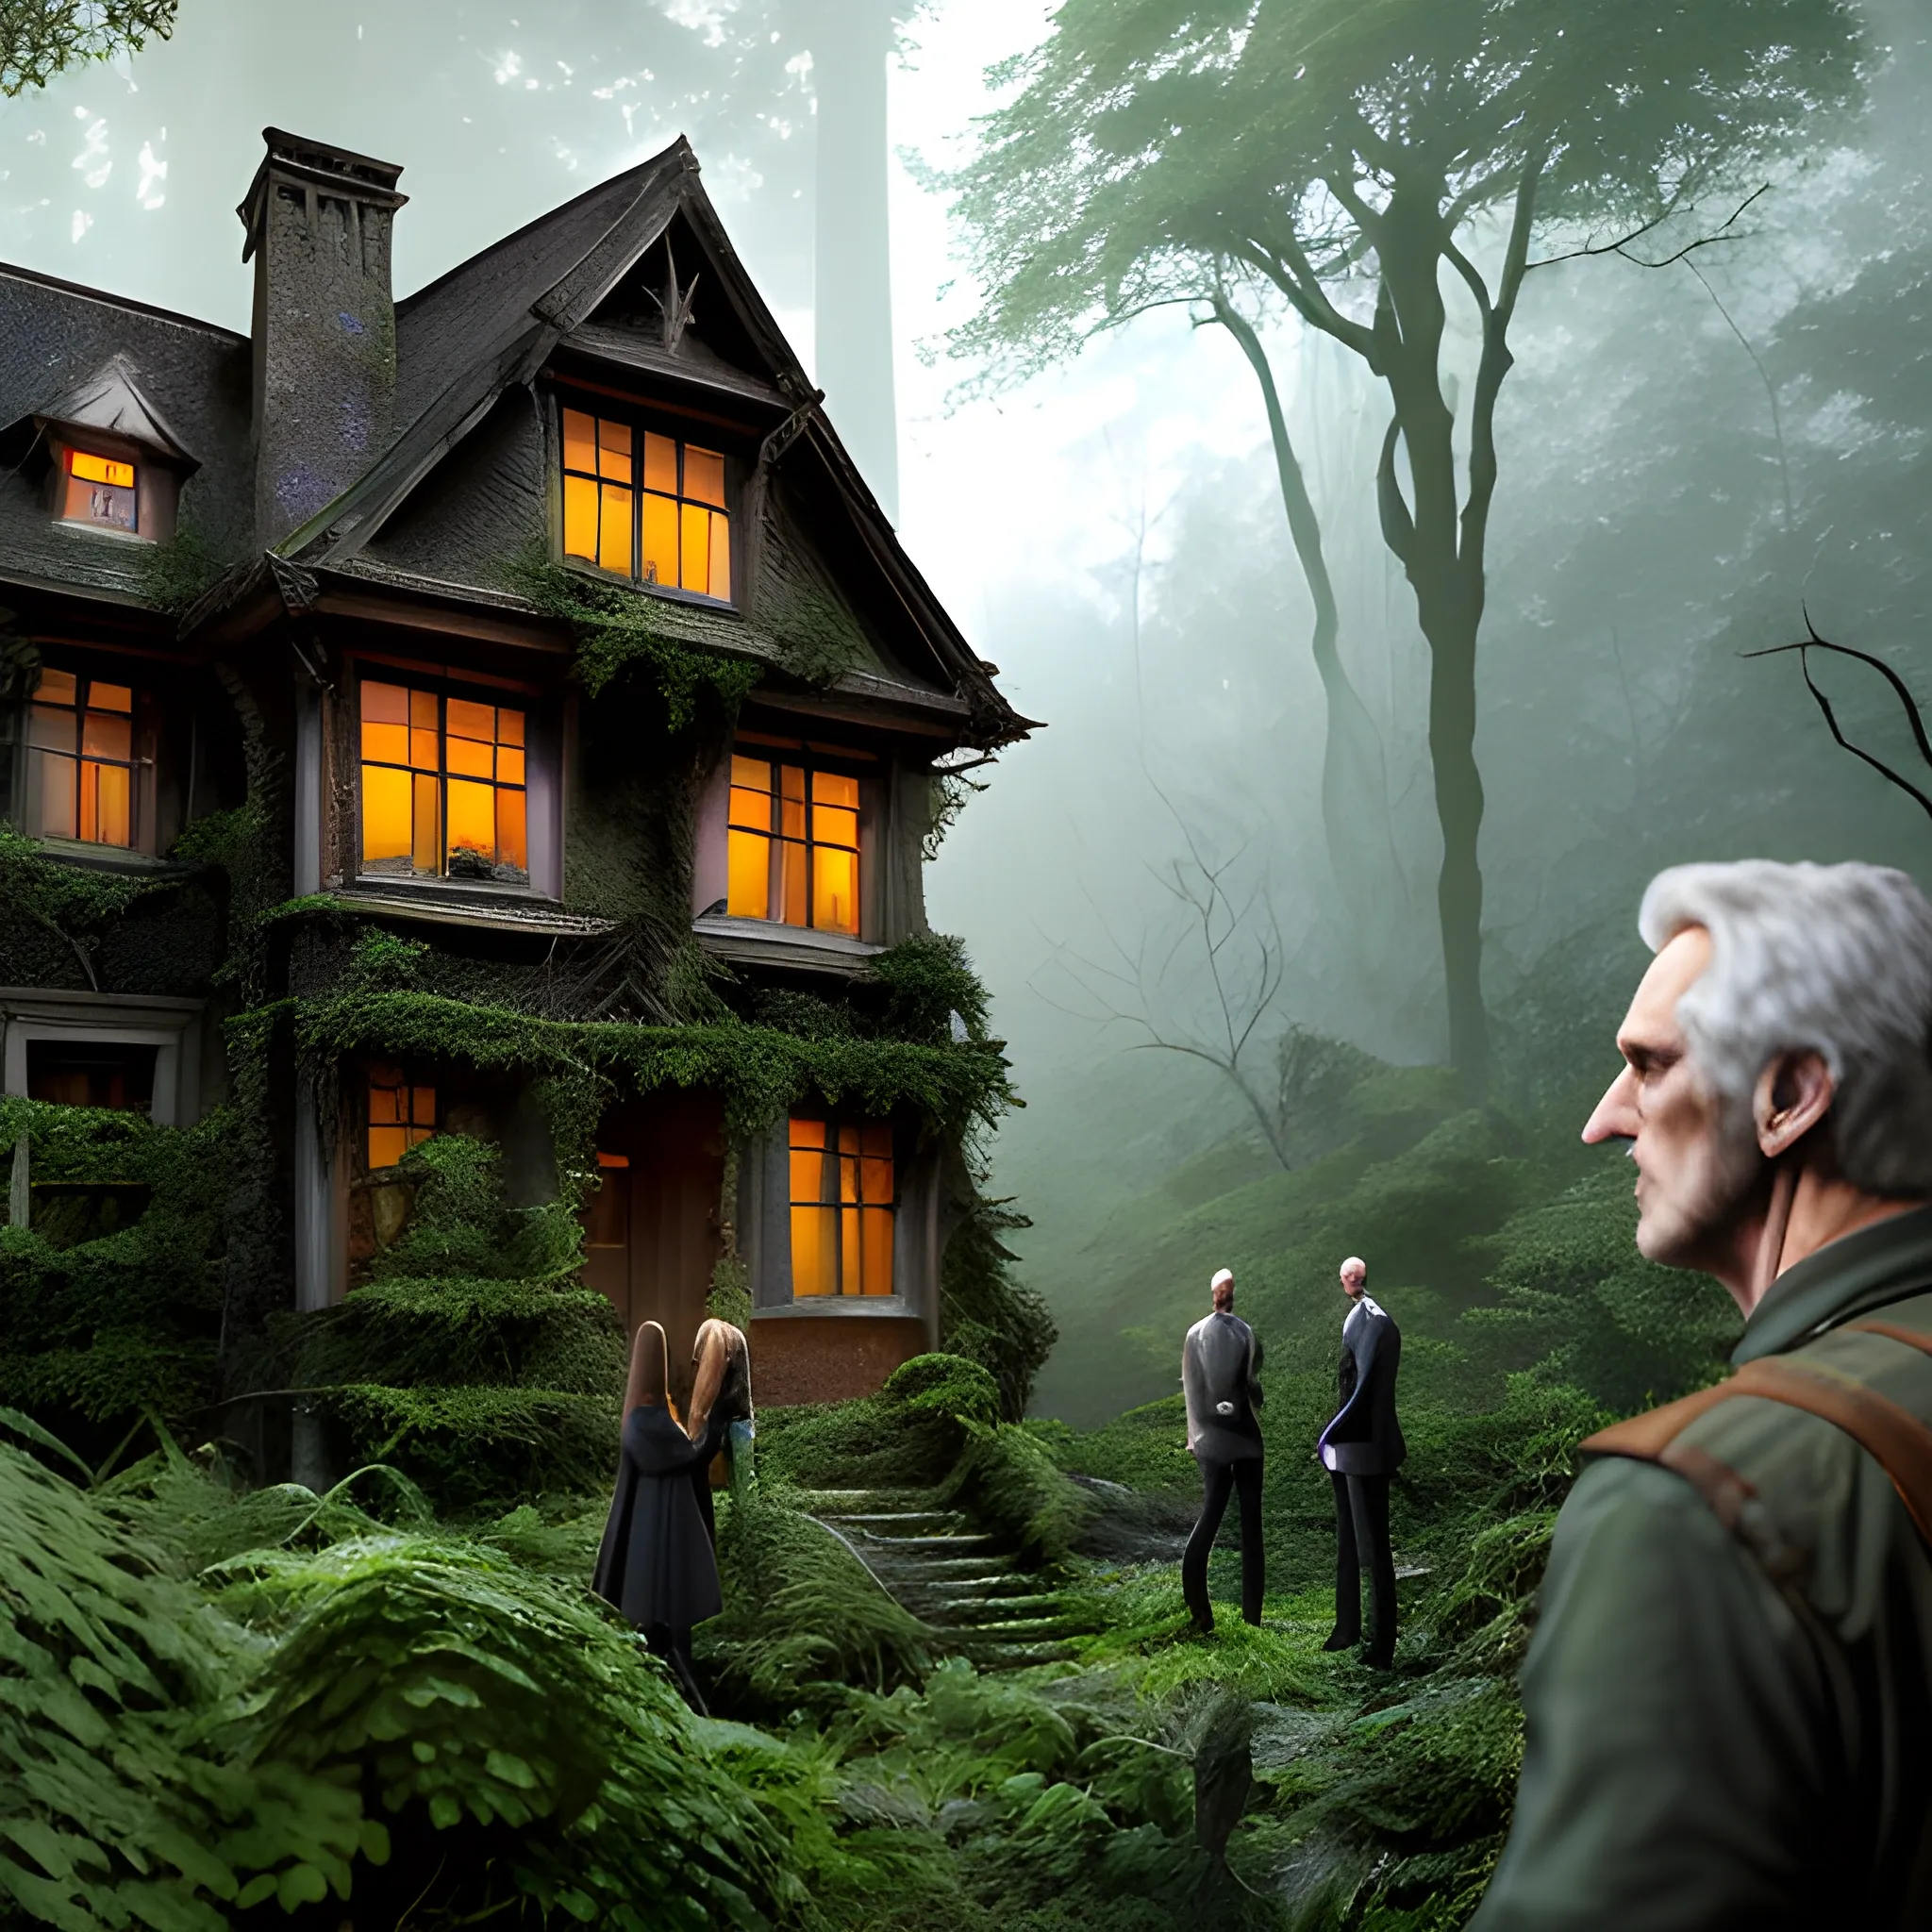 Description: Picture four children (two boys and two girls) standing at the edge of a dense forest. They should look intrigued and maybe a bit cautious as they observe an old, eerie house that seems to have appeared among the trees. The house should look dilapidated, with broken windows and ivy creeping up its walls., , Realistic , vibrant